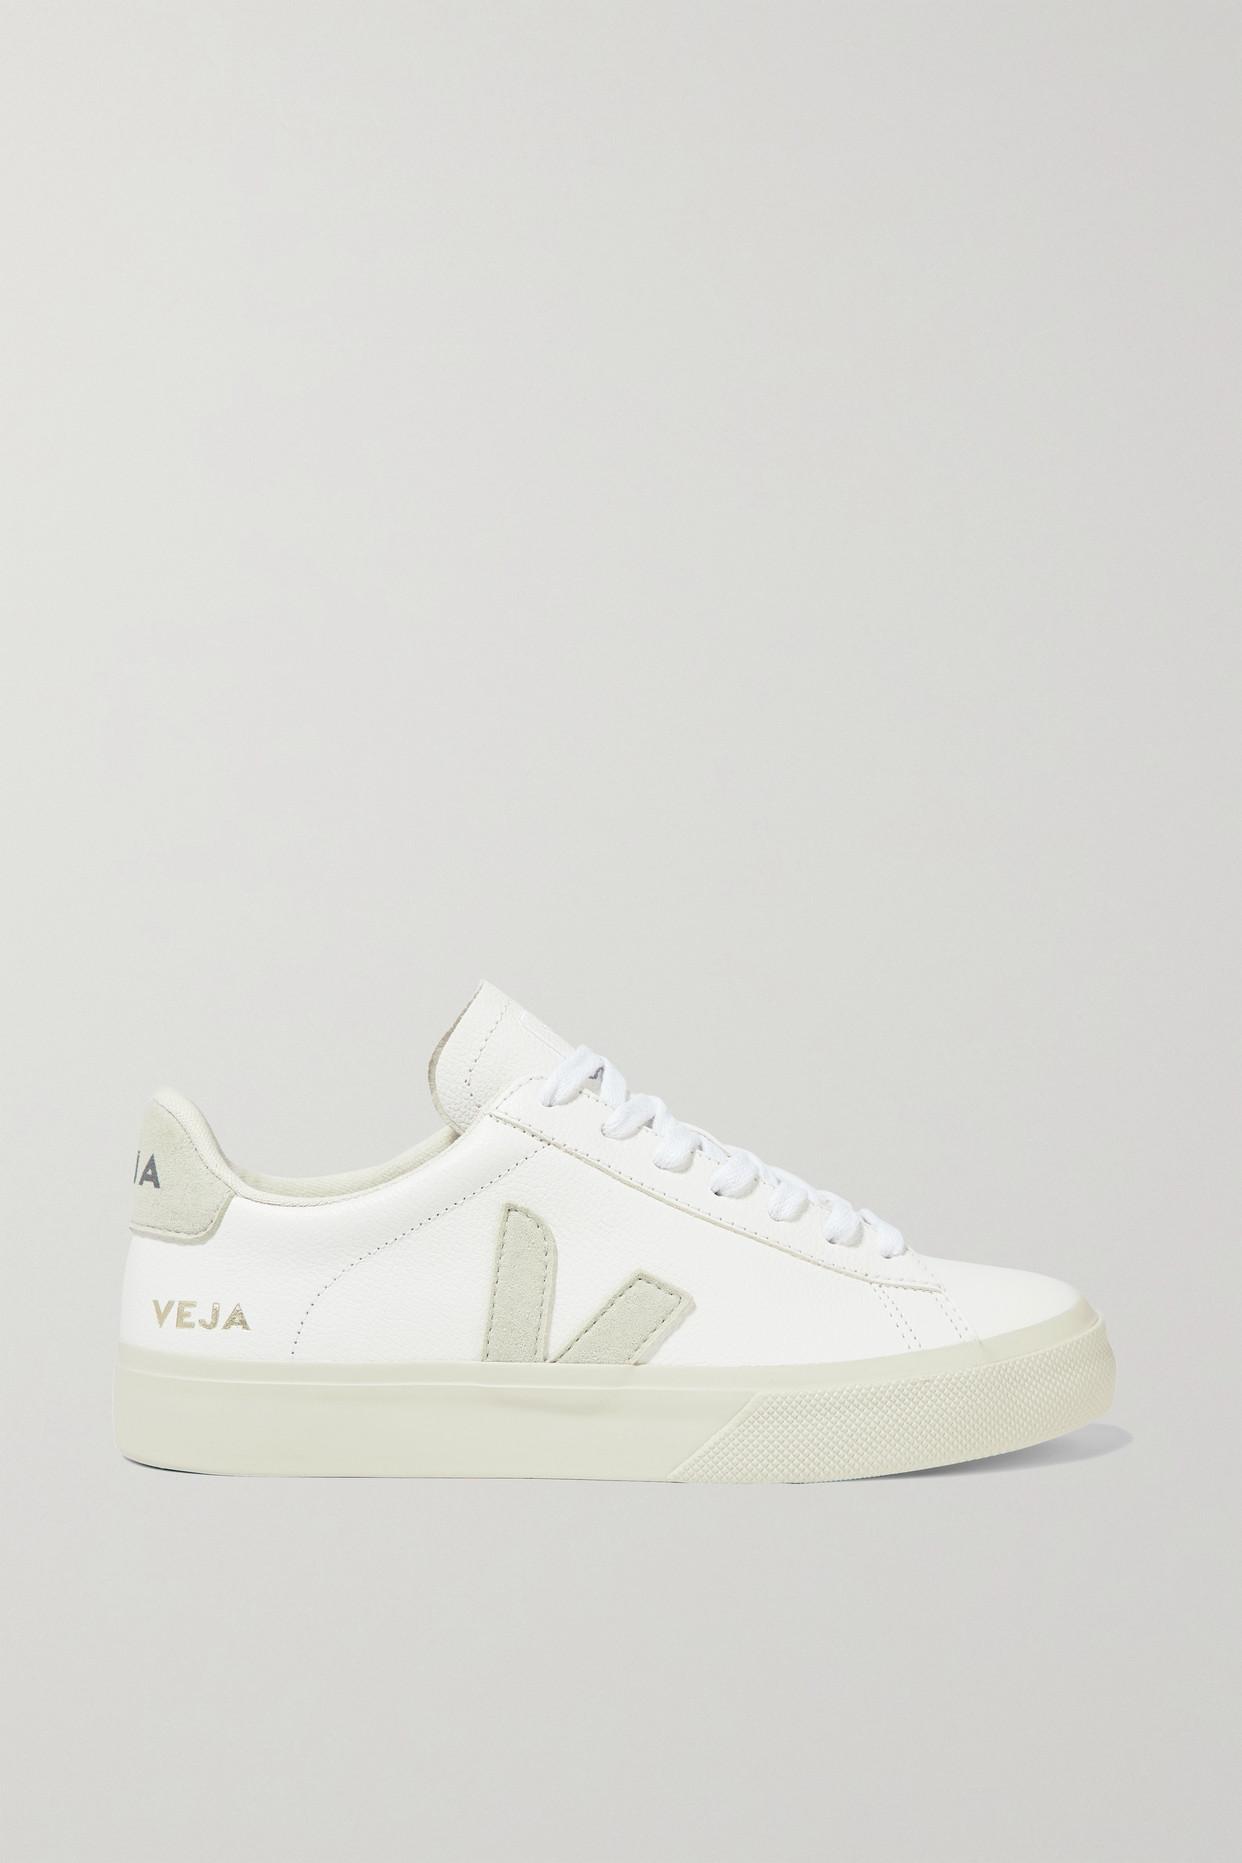 Veja + Net Sustain Campo Leather And Suede Sneakers in White | Lyst